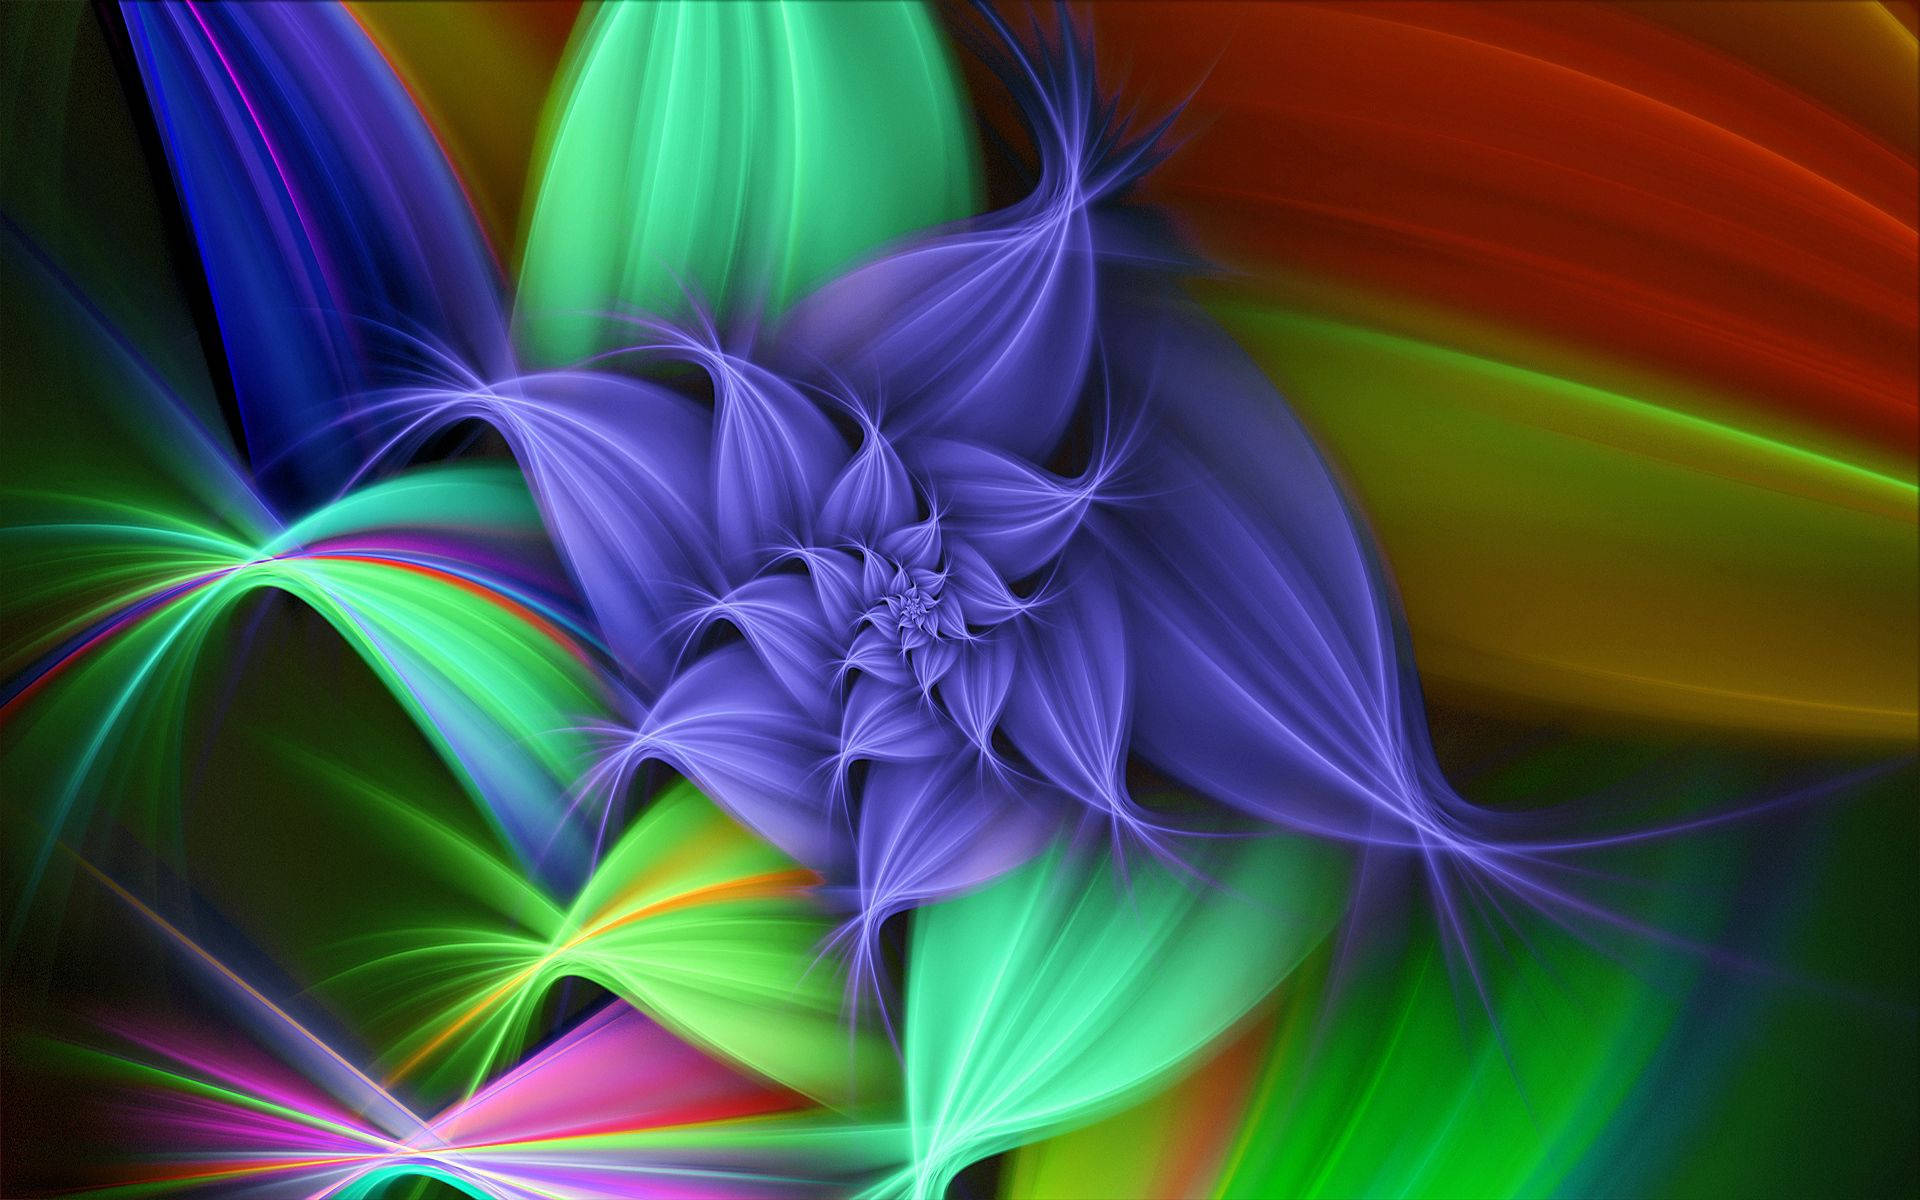 'Vibrant colors come alive in this abstract flower pattern.' Wallpaper